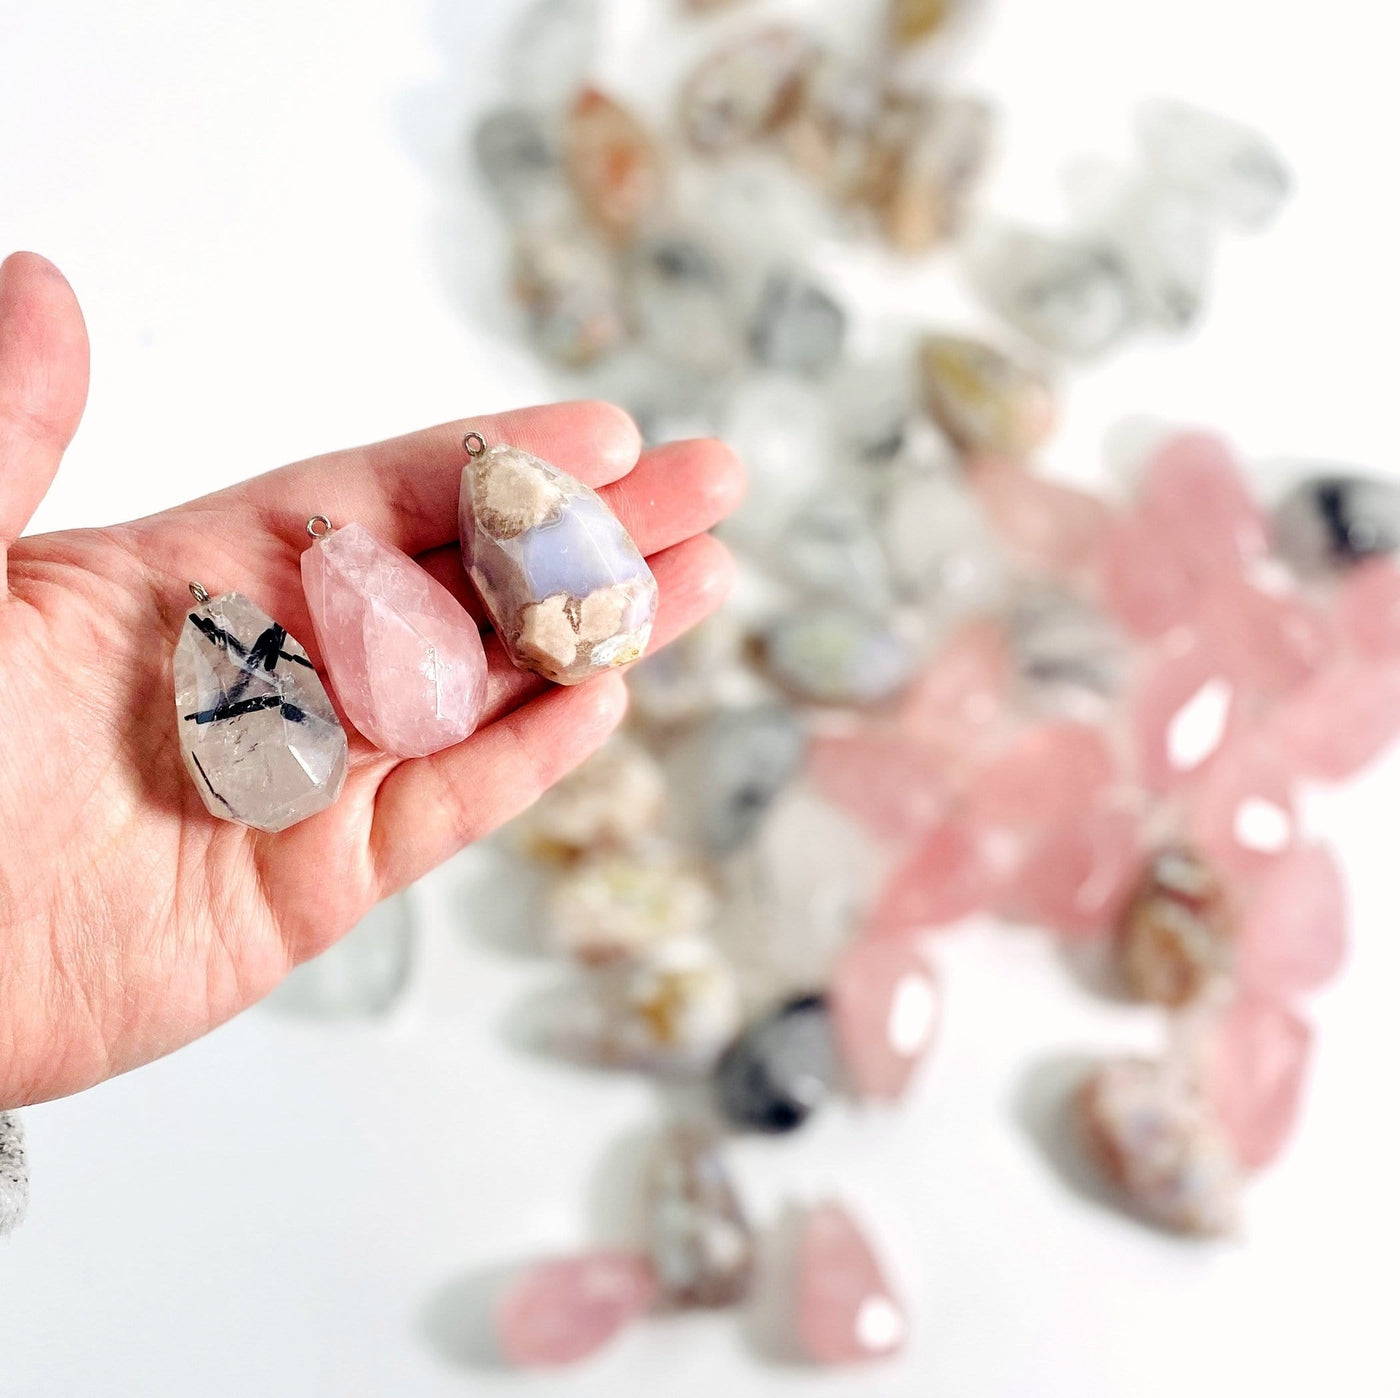 Hand holding up 1 of each Rose Quartz Rutilated Quartz Flower Agate Pendant with pile of others blurred in the background